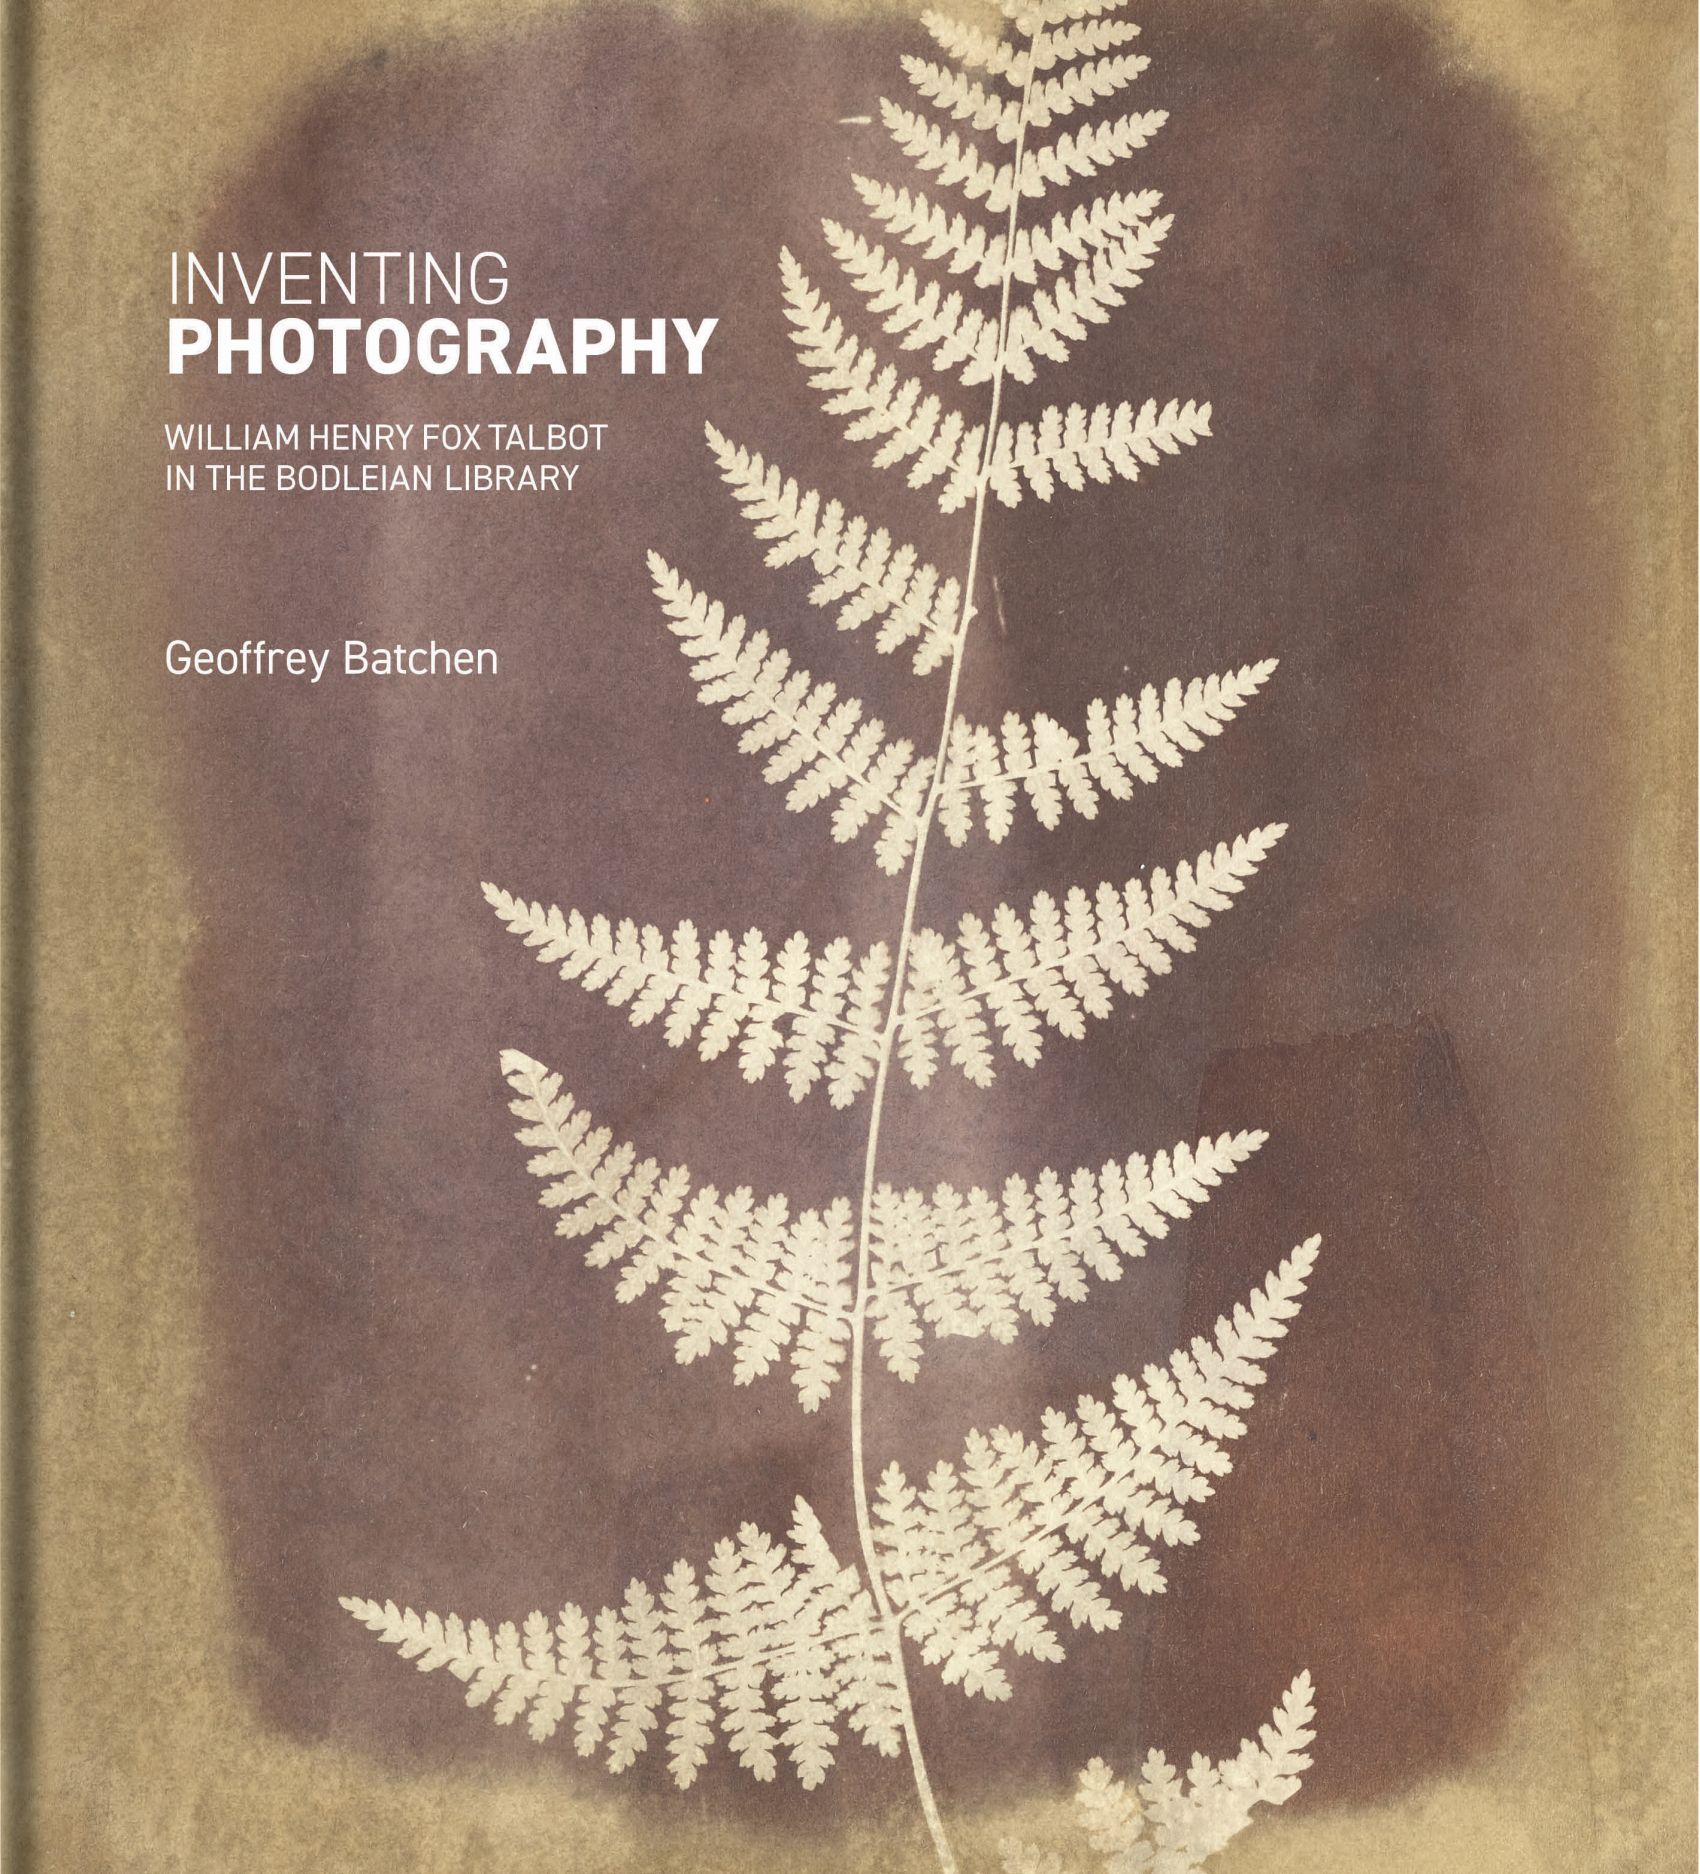 Inventing Photography: William Henry Fox Talbot in the Bodleian Library, Batchen